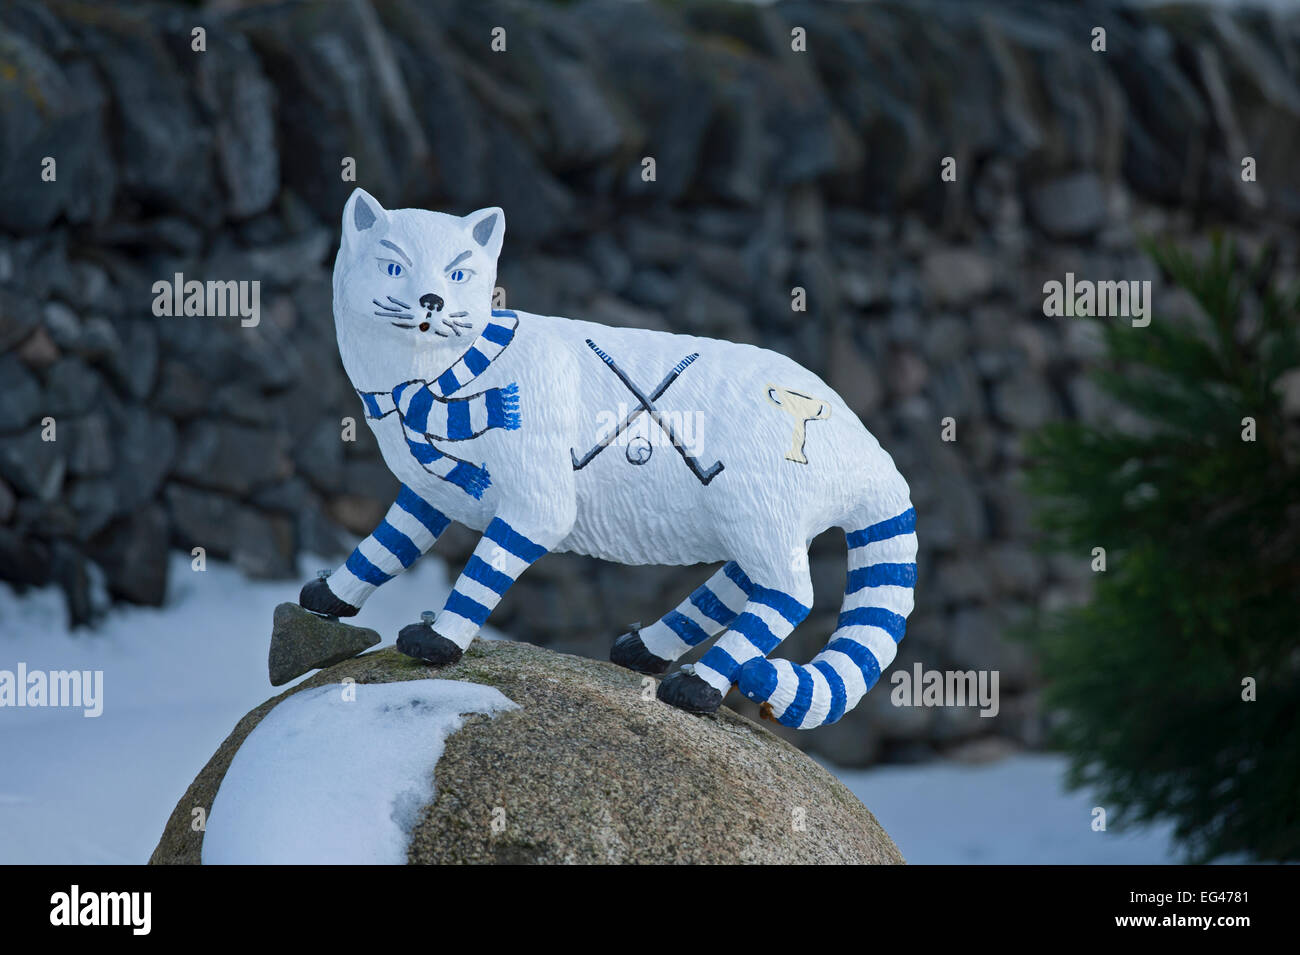 The wild cat mascot of the Newtonmore Shinty Club in Badenoch and Strathspey Inverness-shire Scotland.  SCO 9576. Stock Photo